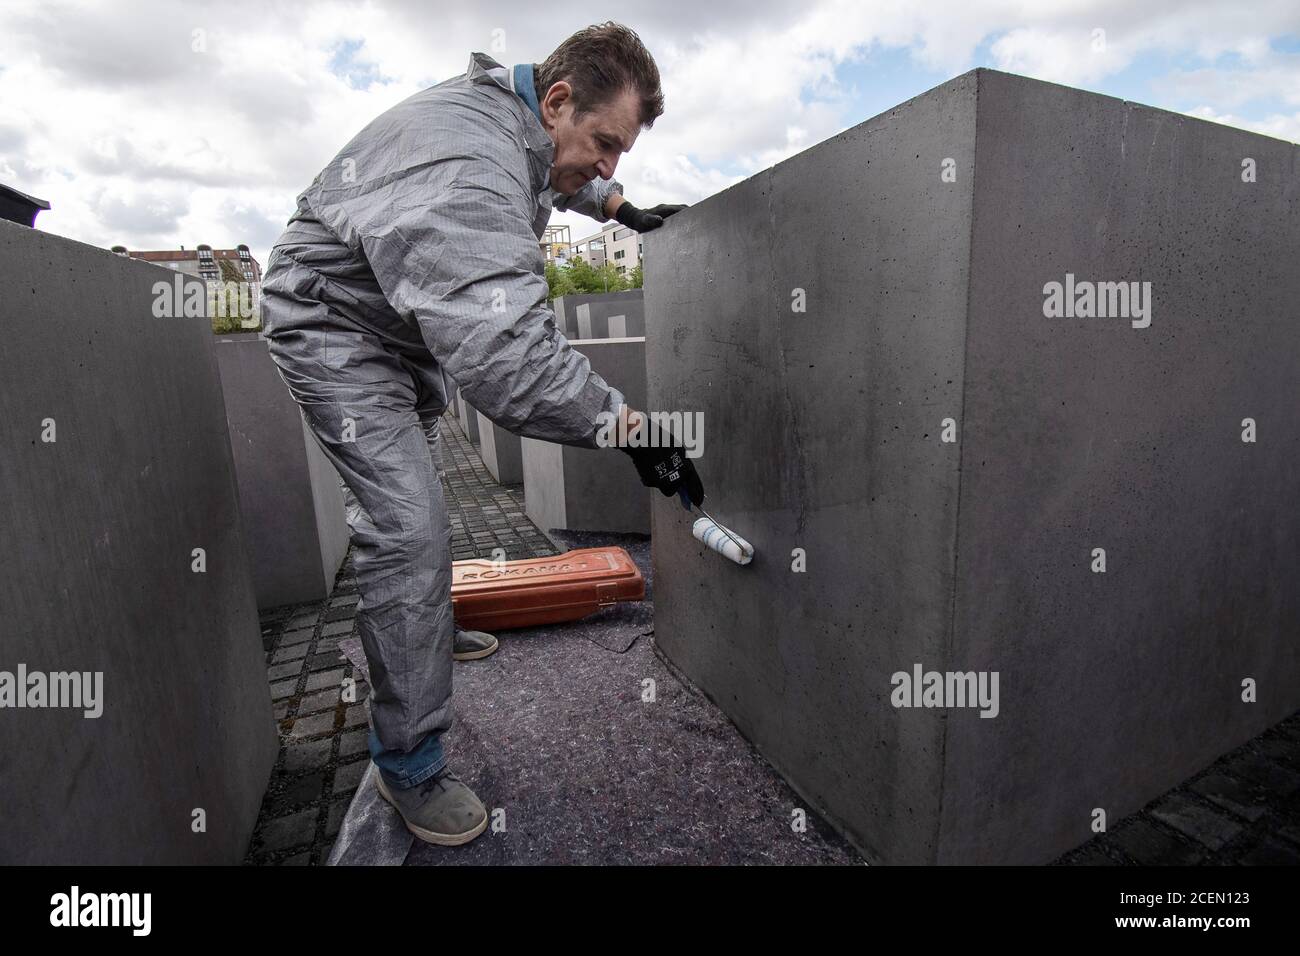 Berlin, Germany. 27th Aug, 2020. Bernd Efinger, managing director of the company EAG from Hanover, applies a pattern of graffiti and surface protection on a stele of the Memorial to the Murdered Jews of Europe, or Holocaust Memorial for short. At the Berlin Holocaust Memorial, a restoration method has been tested. This involves damage to the concrete steles, which have been a problem for years. (to 'Test restoration at the Berlin Holocaust Memorial') Credit: Paul Zinken/dpa-Zentralbild/dpa/Alamy Live News Stock Photo